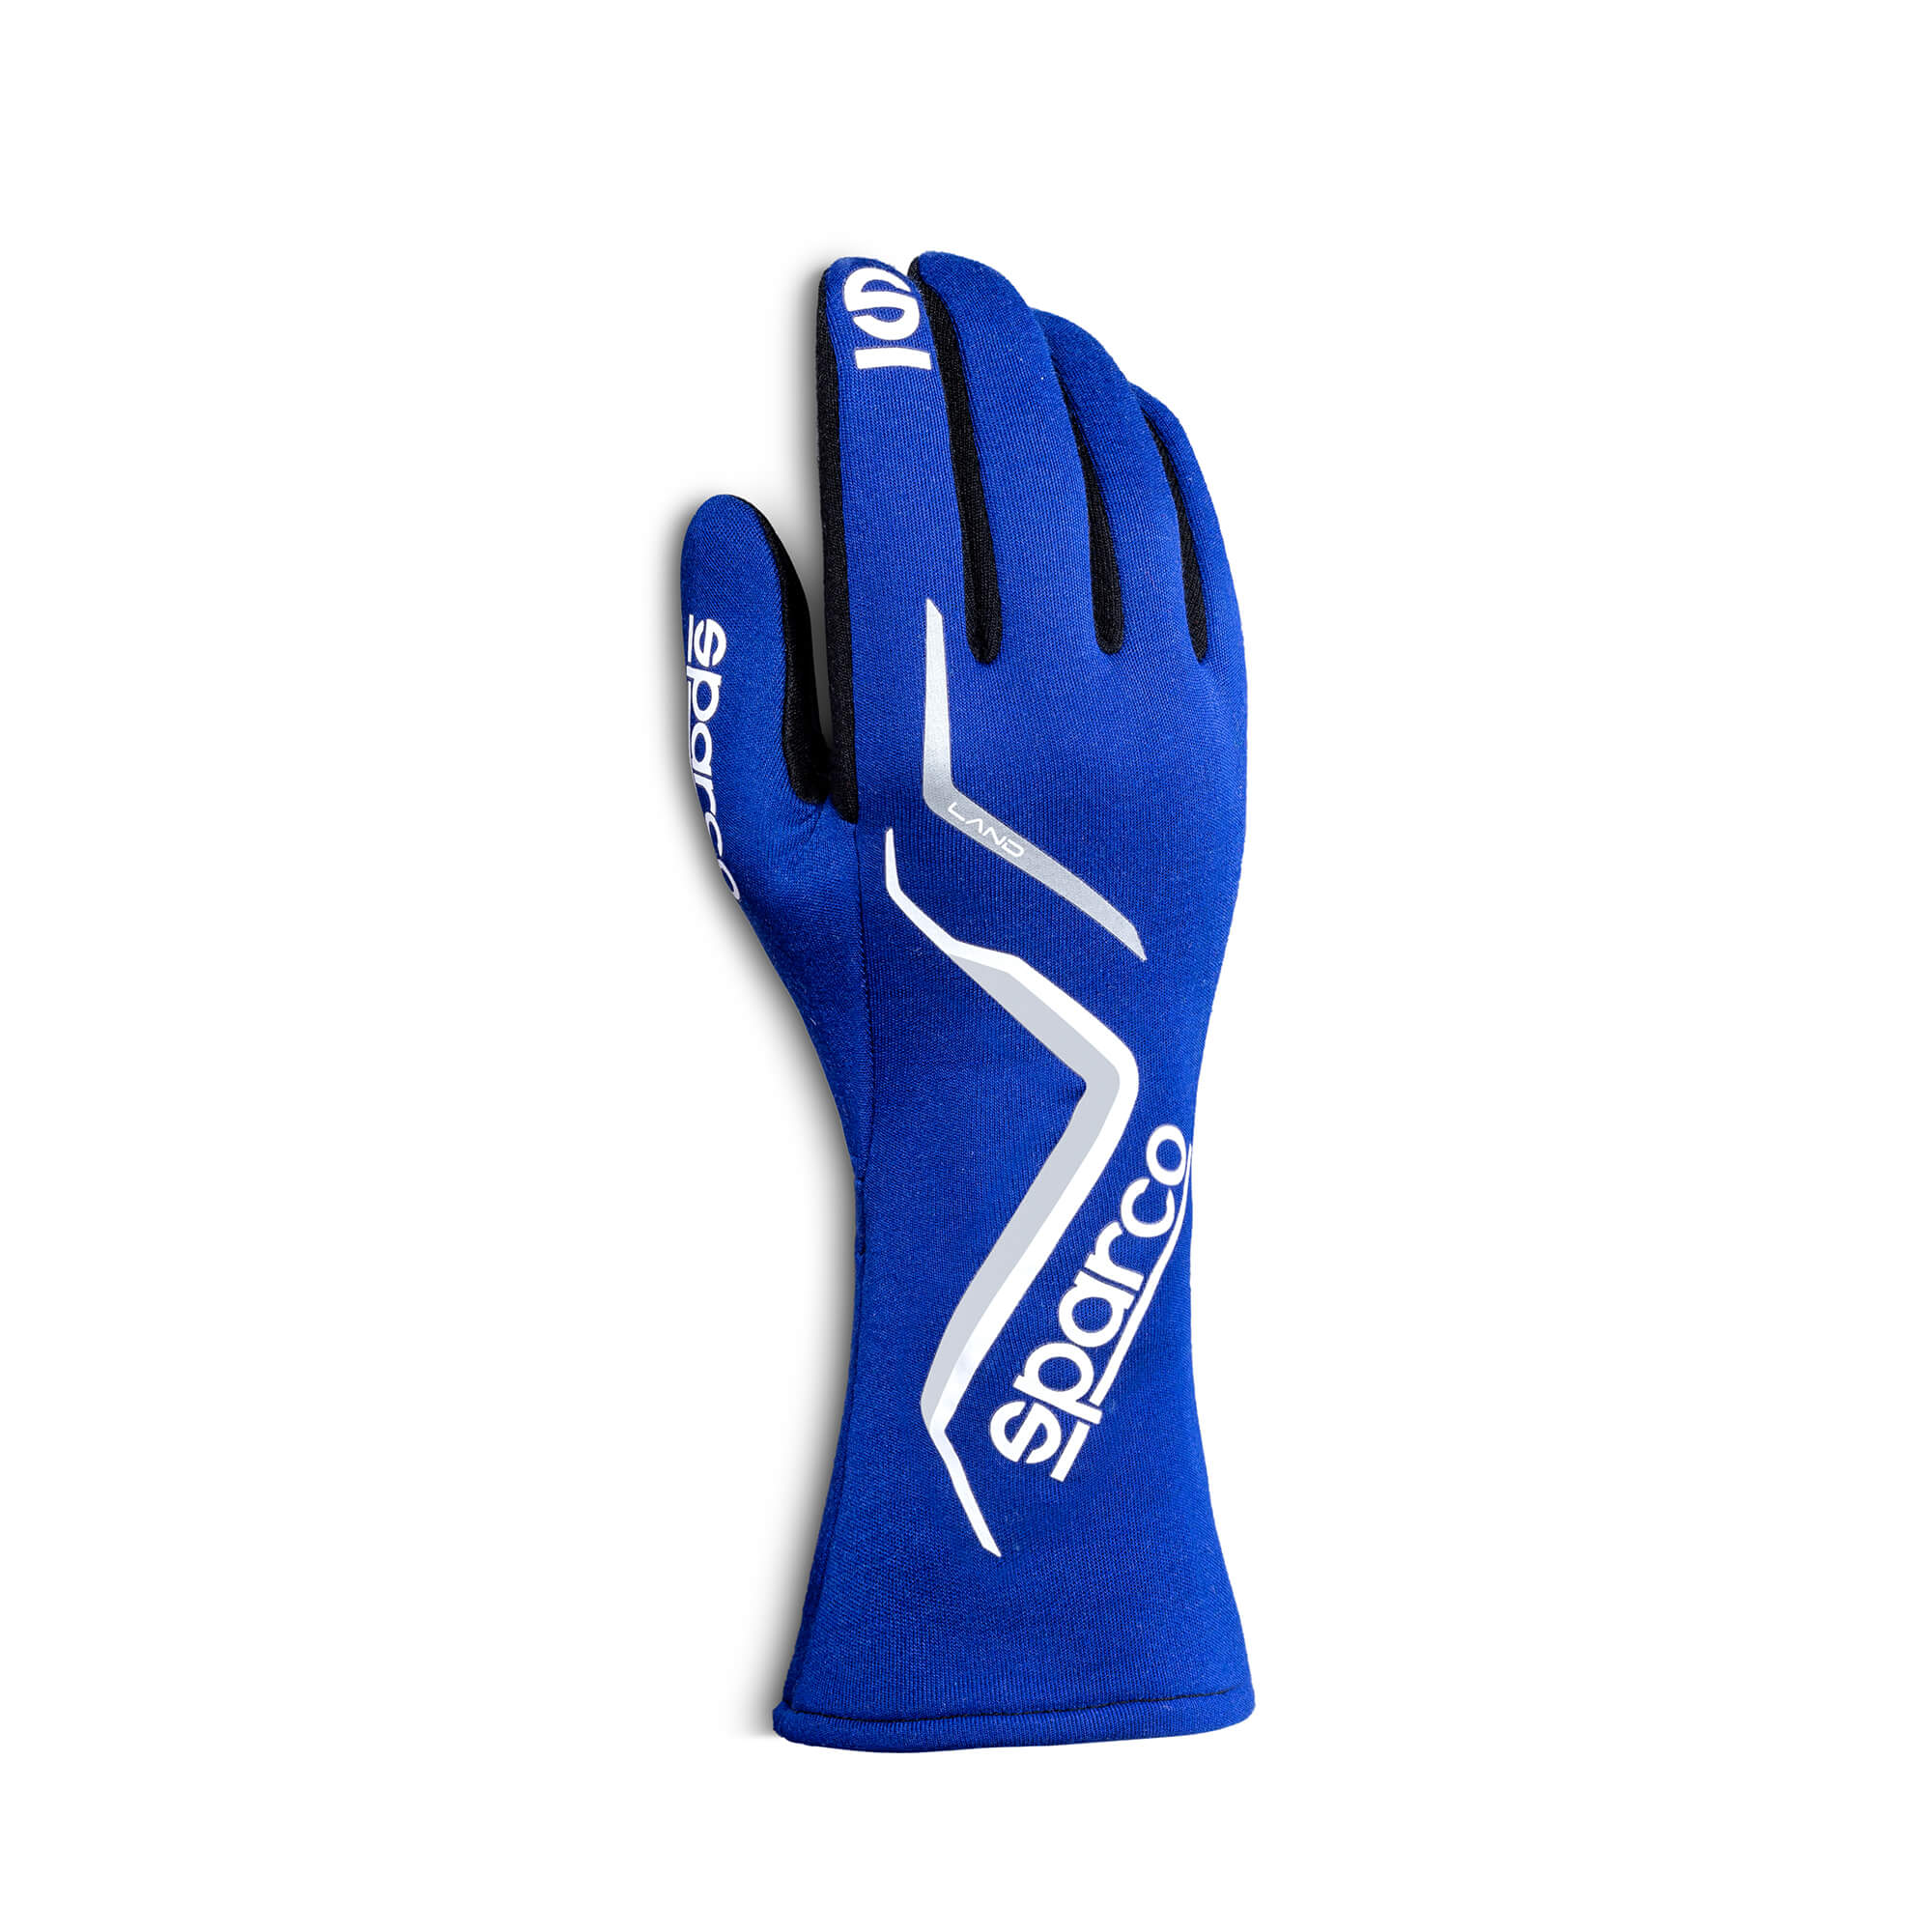 SPARCO 00136311EB LAND 2022 Racing gloves, FIA 8856-2018, blue, size 11 Photo-0 